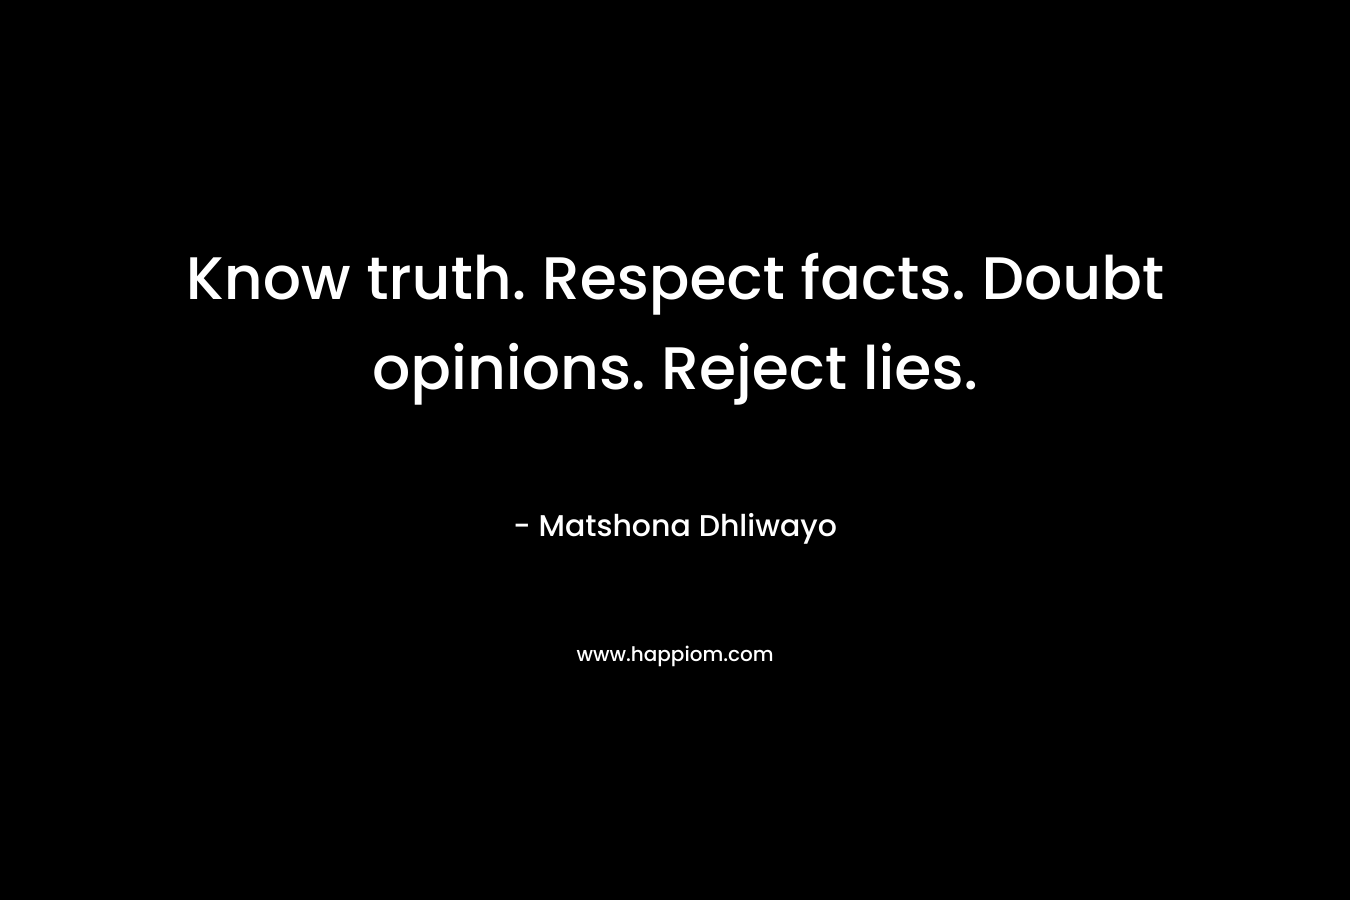 Know truth. Respect facts. Doubt opinions. Reject lies.